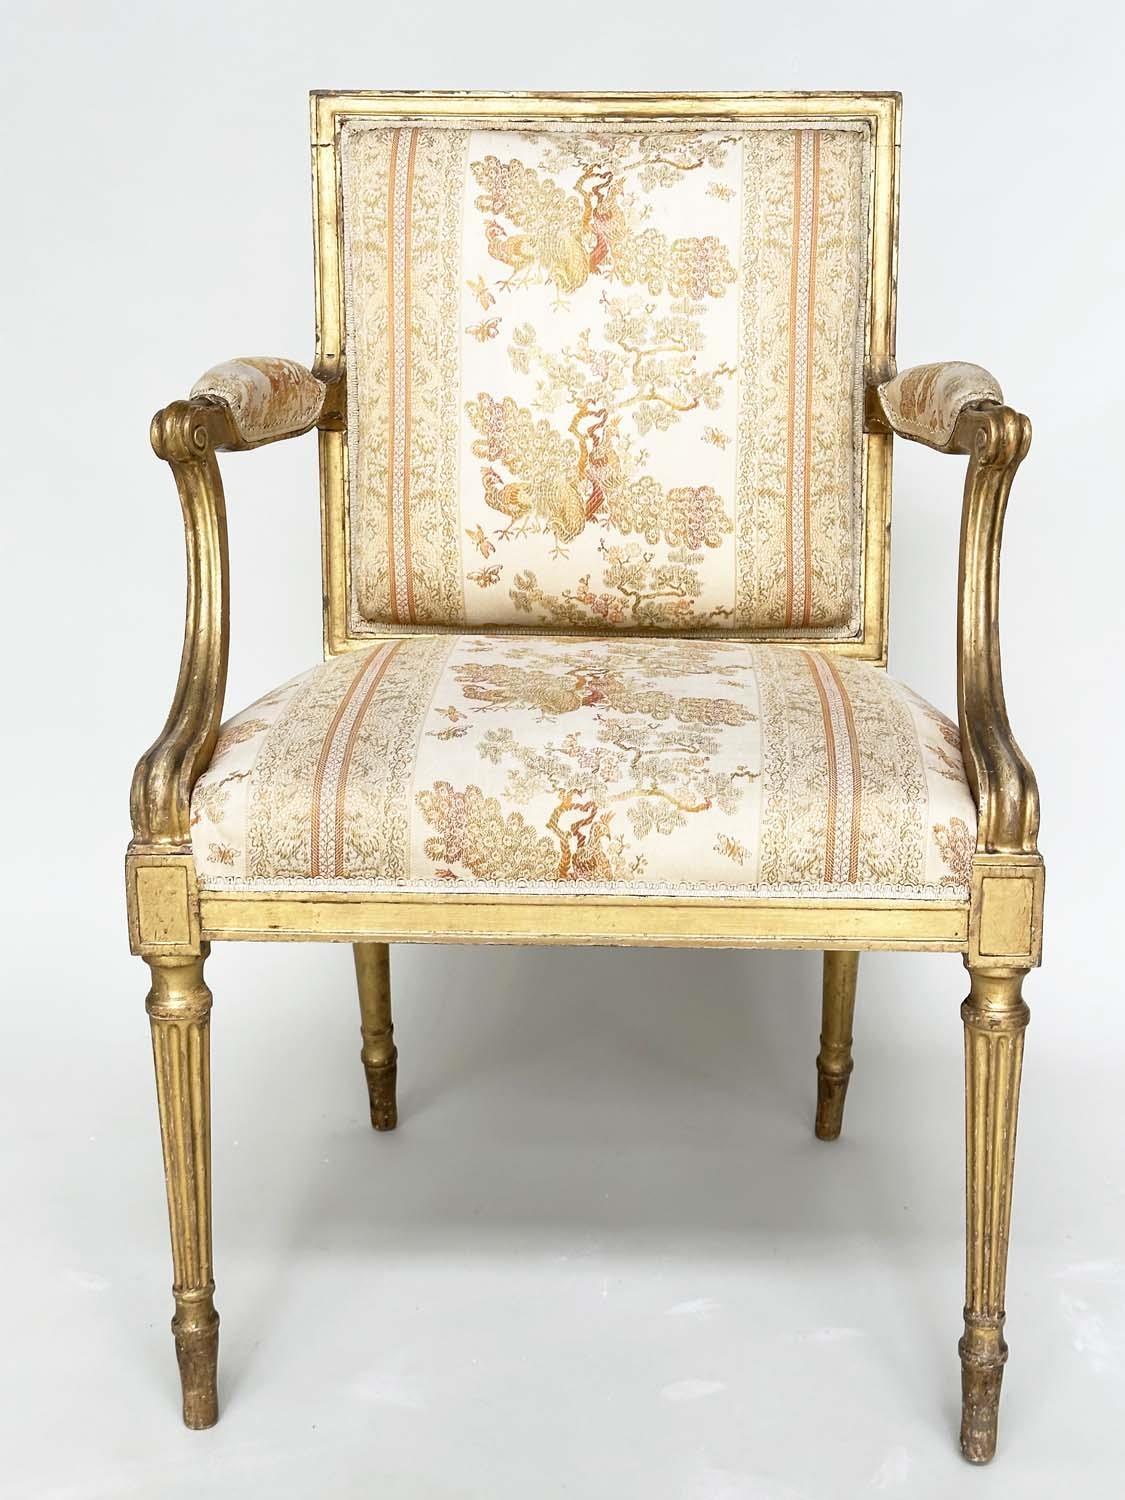 FAUTEUILS, a pair, 19th century giltwood each with down swept arms and carved fluted supports, - Image 3 of 11